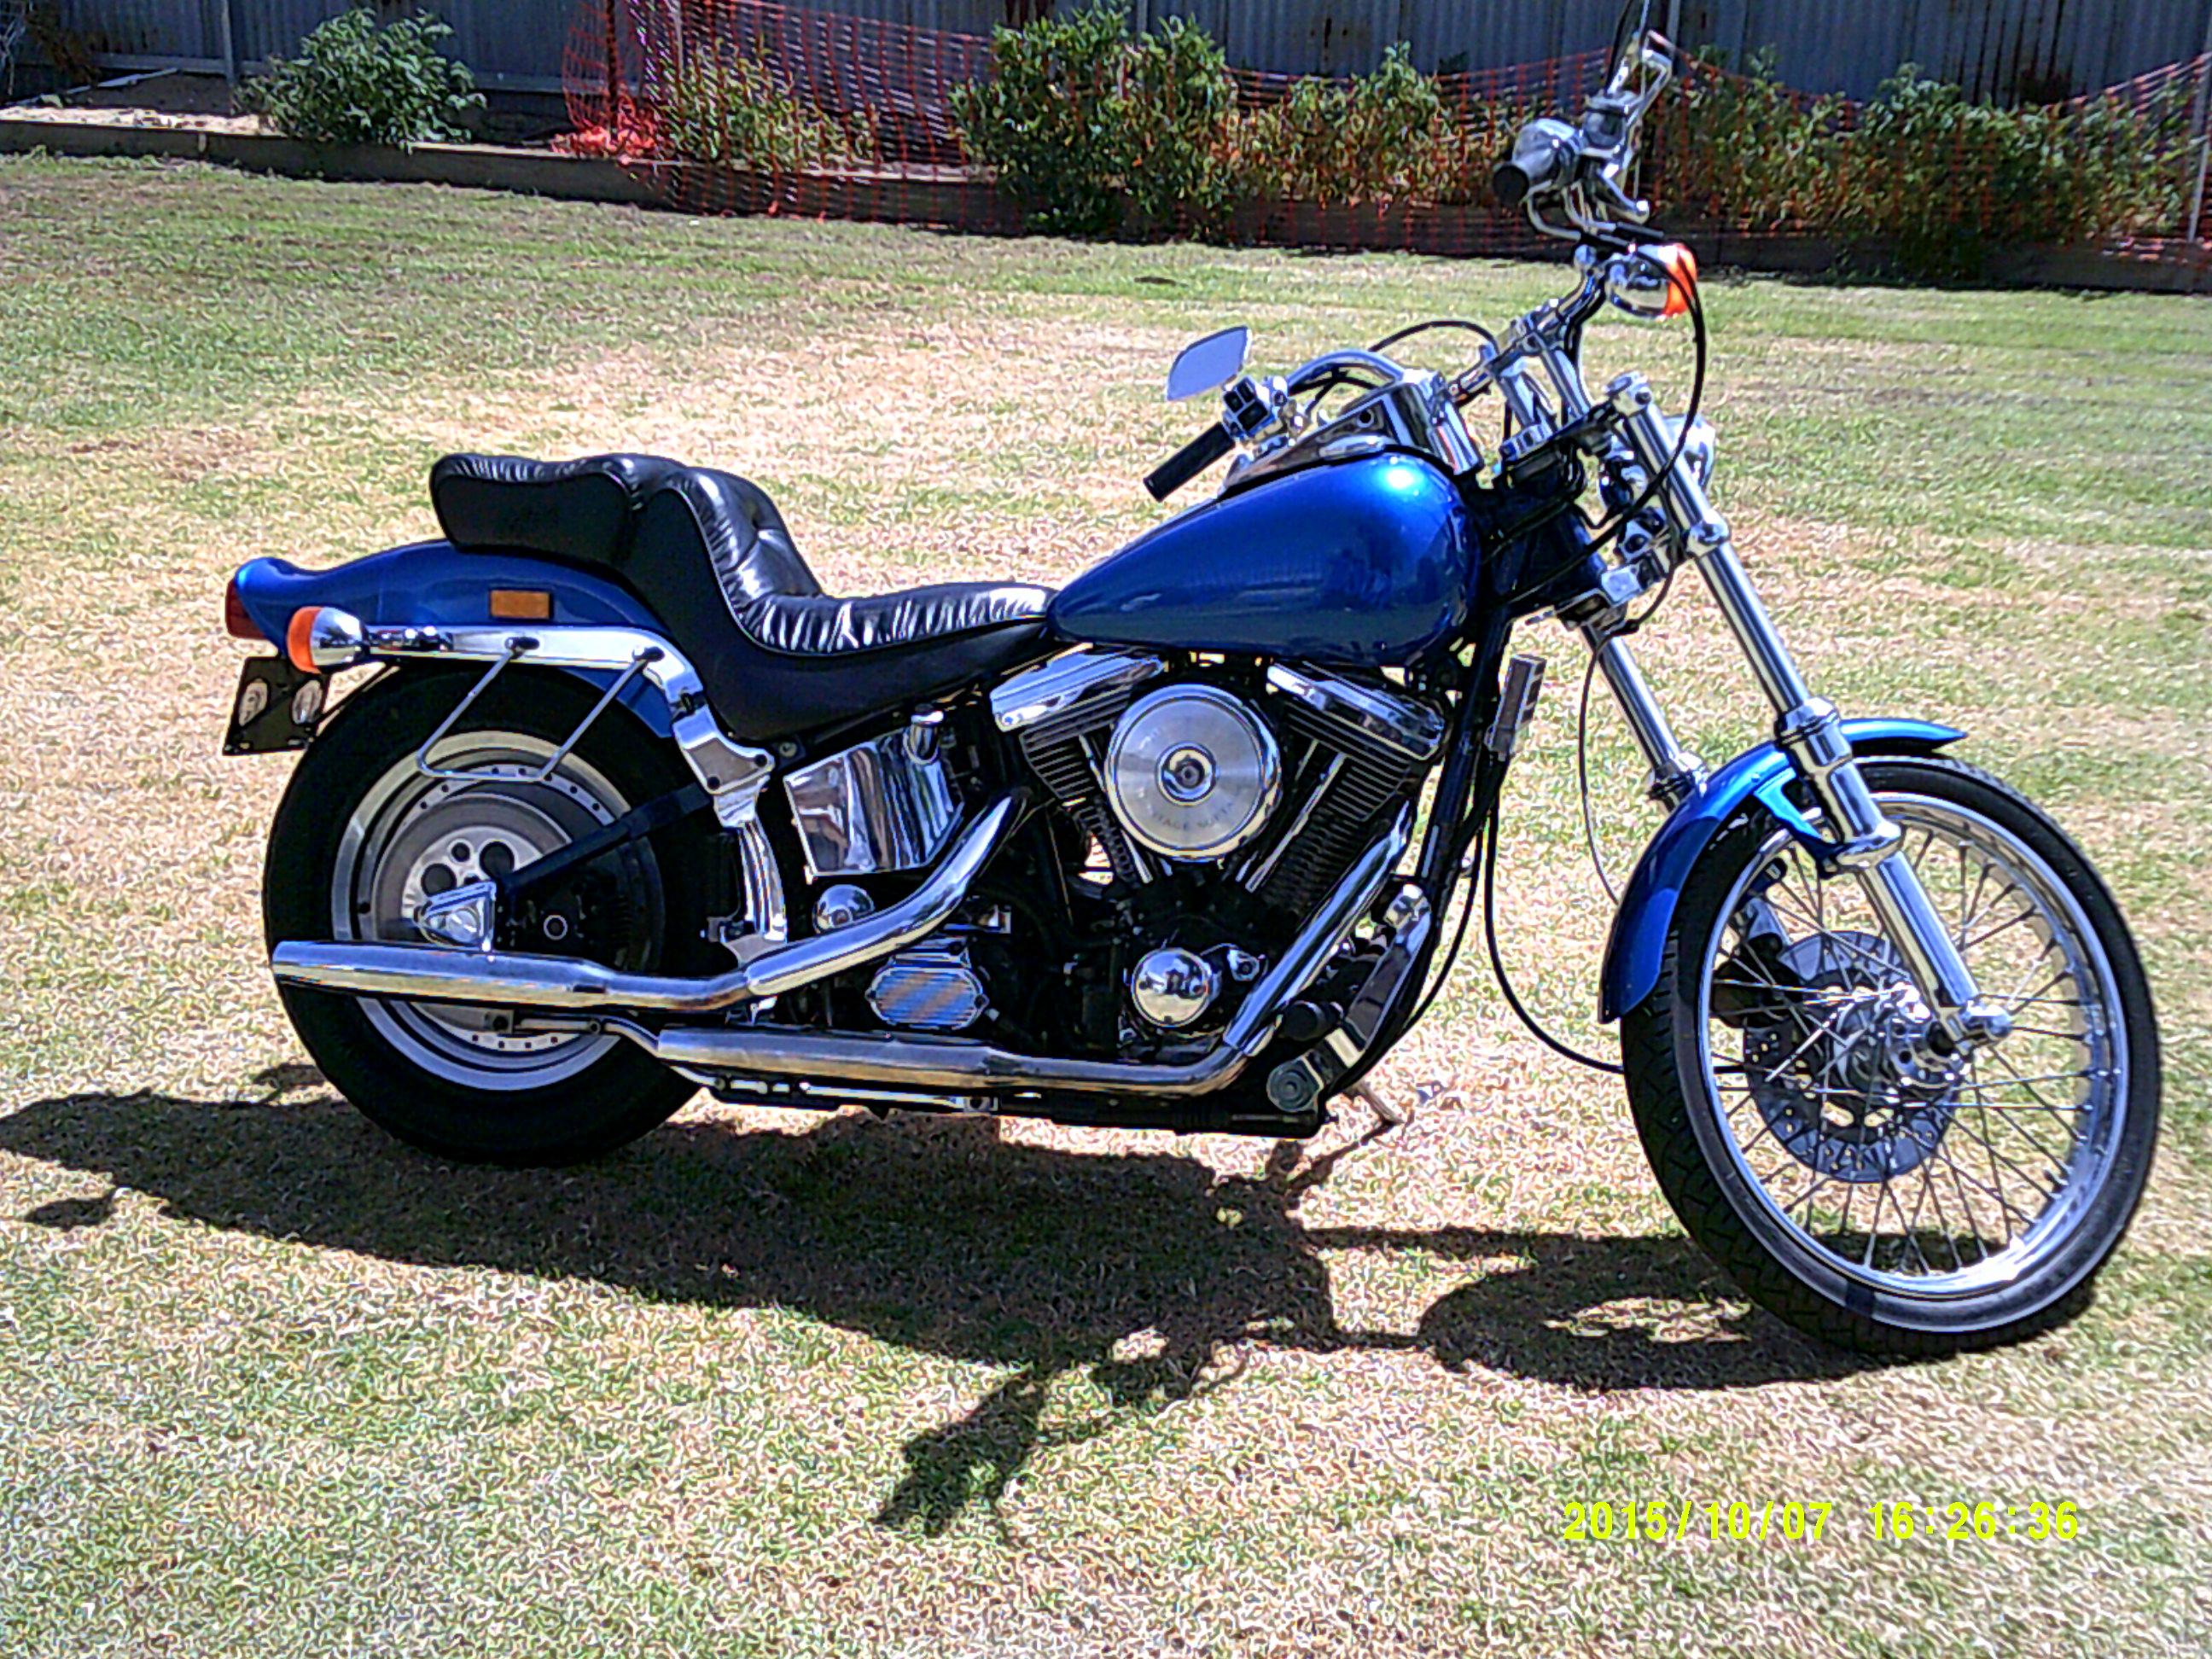 1987 Harley Davidson Softail Factory Sale, 57% OFF | pwdnutrition.com